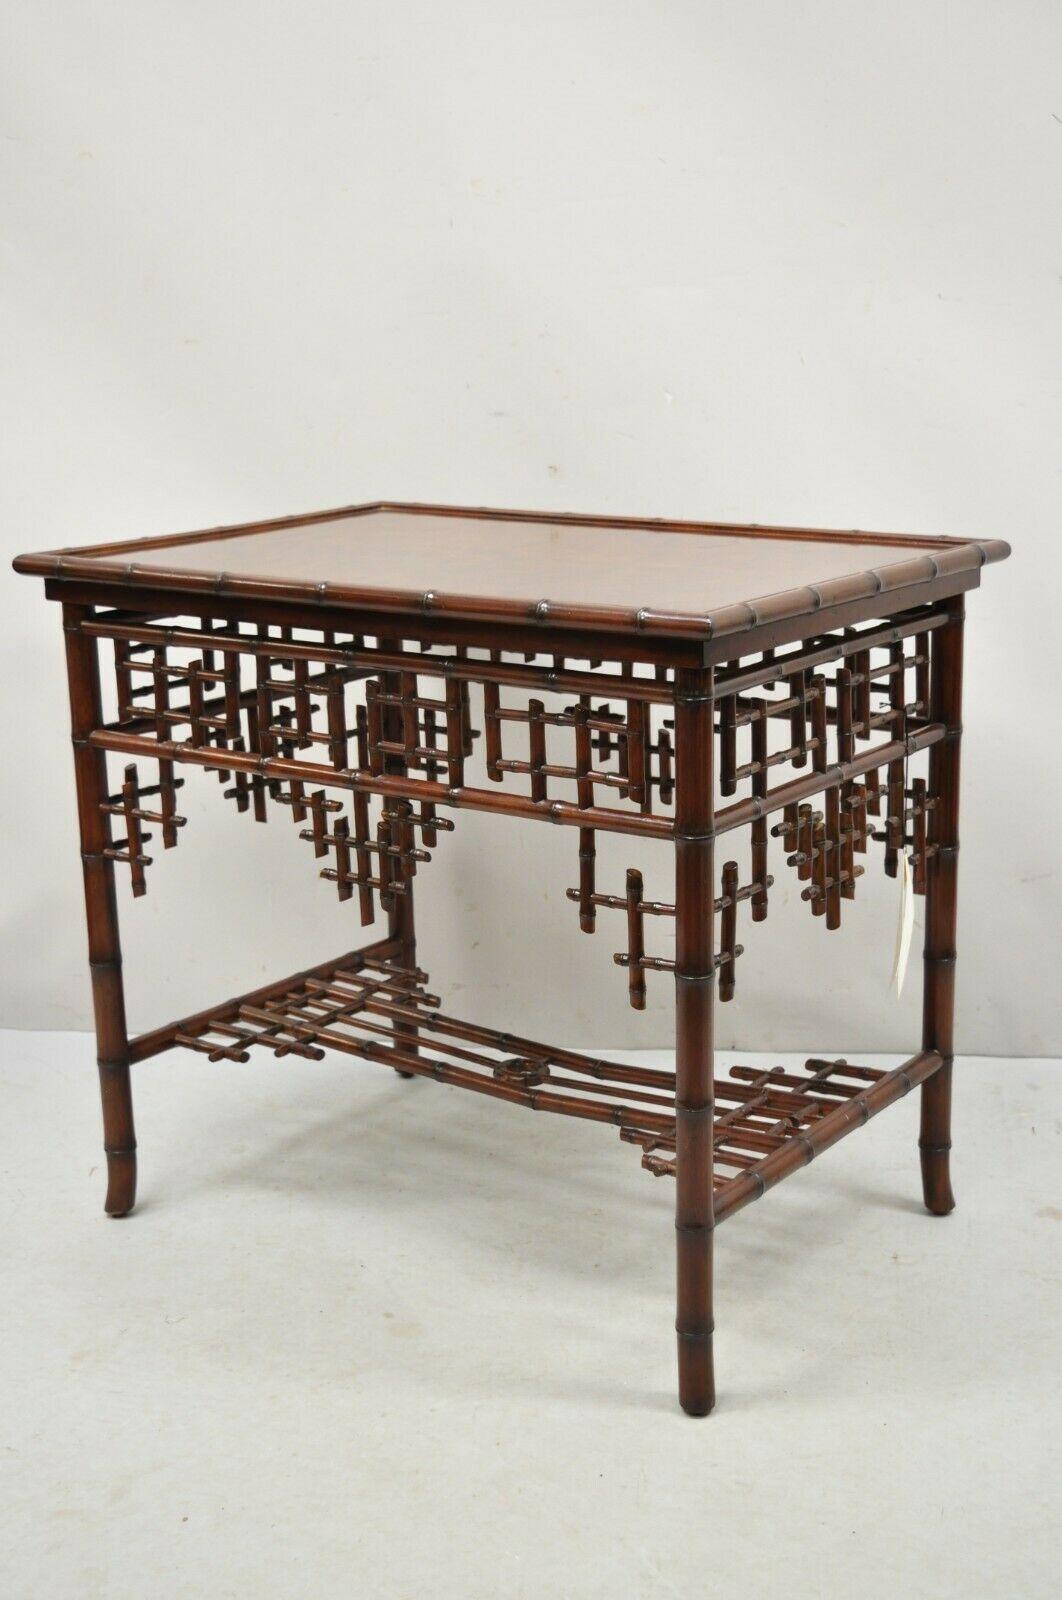 Item: Ralph Lauren Home Indian cove lodge fretwork faux bamboo chinoiseries side table. Item features ornate faux bamboo fretwork skirt and stretcher, solid wood frame, beautiful wood grain, original labels, very nice item, great style and form,